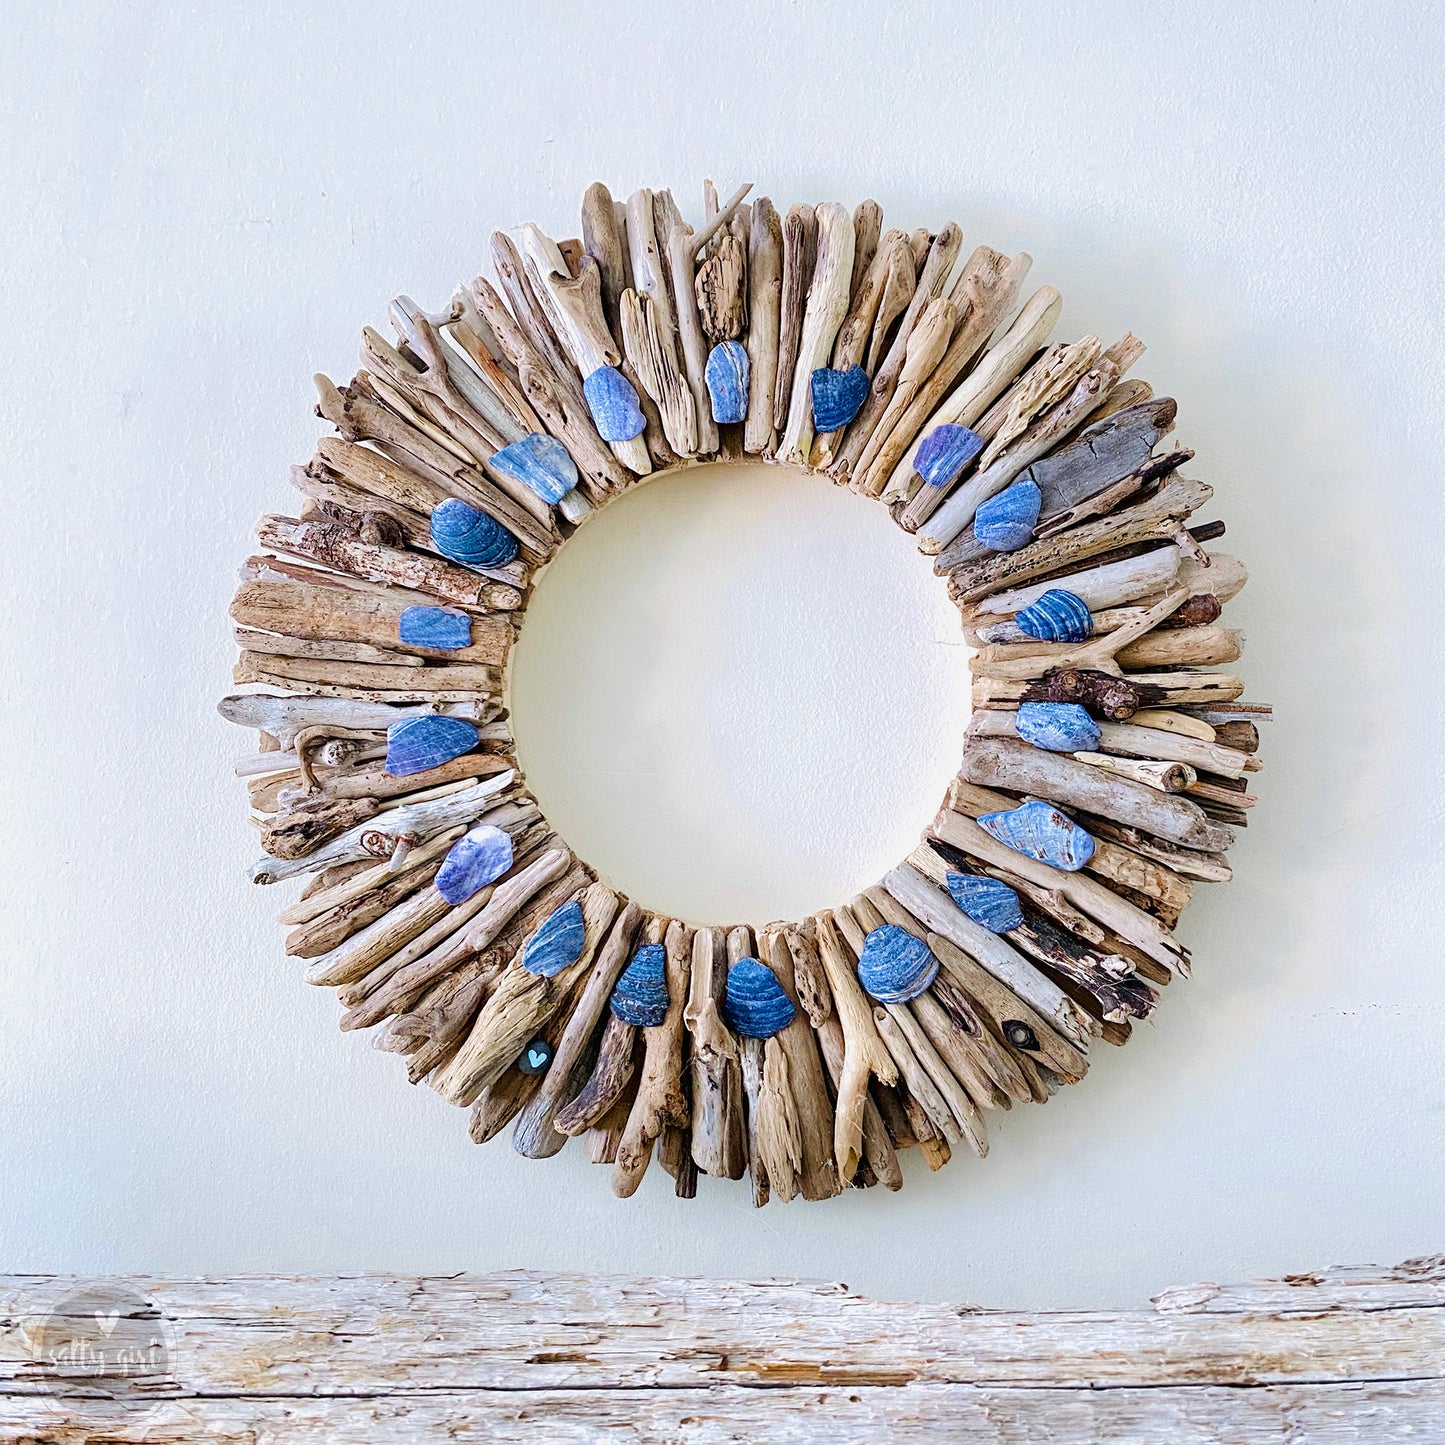 Driftwood Wreath with Indigo Blue Maine Mussel Shell Accents - Sizes 12" - 16" - 20”